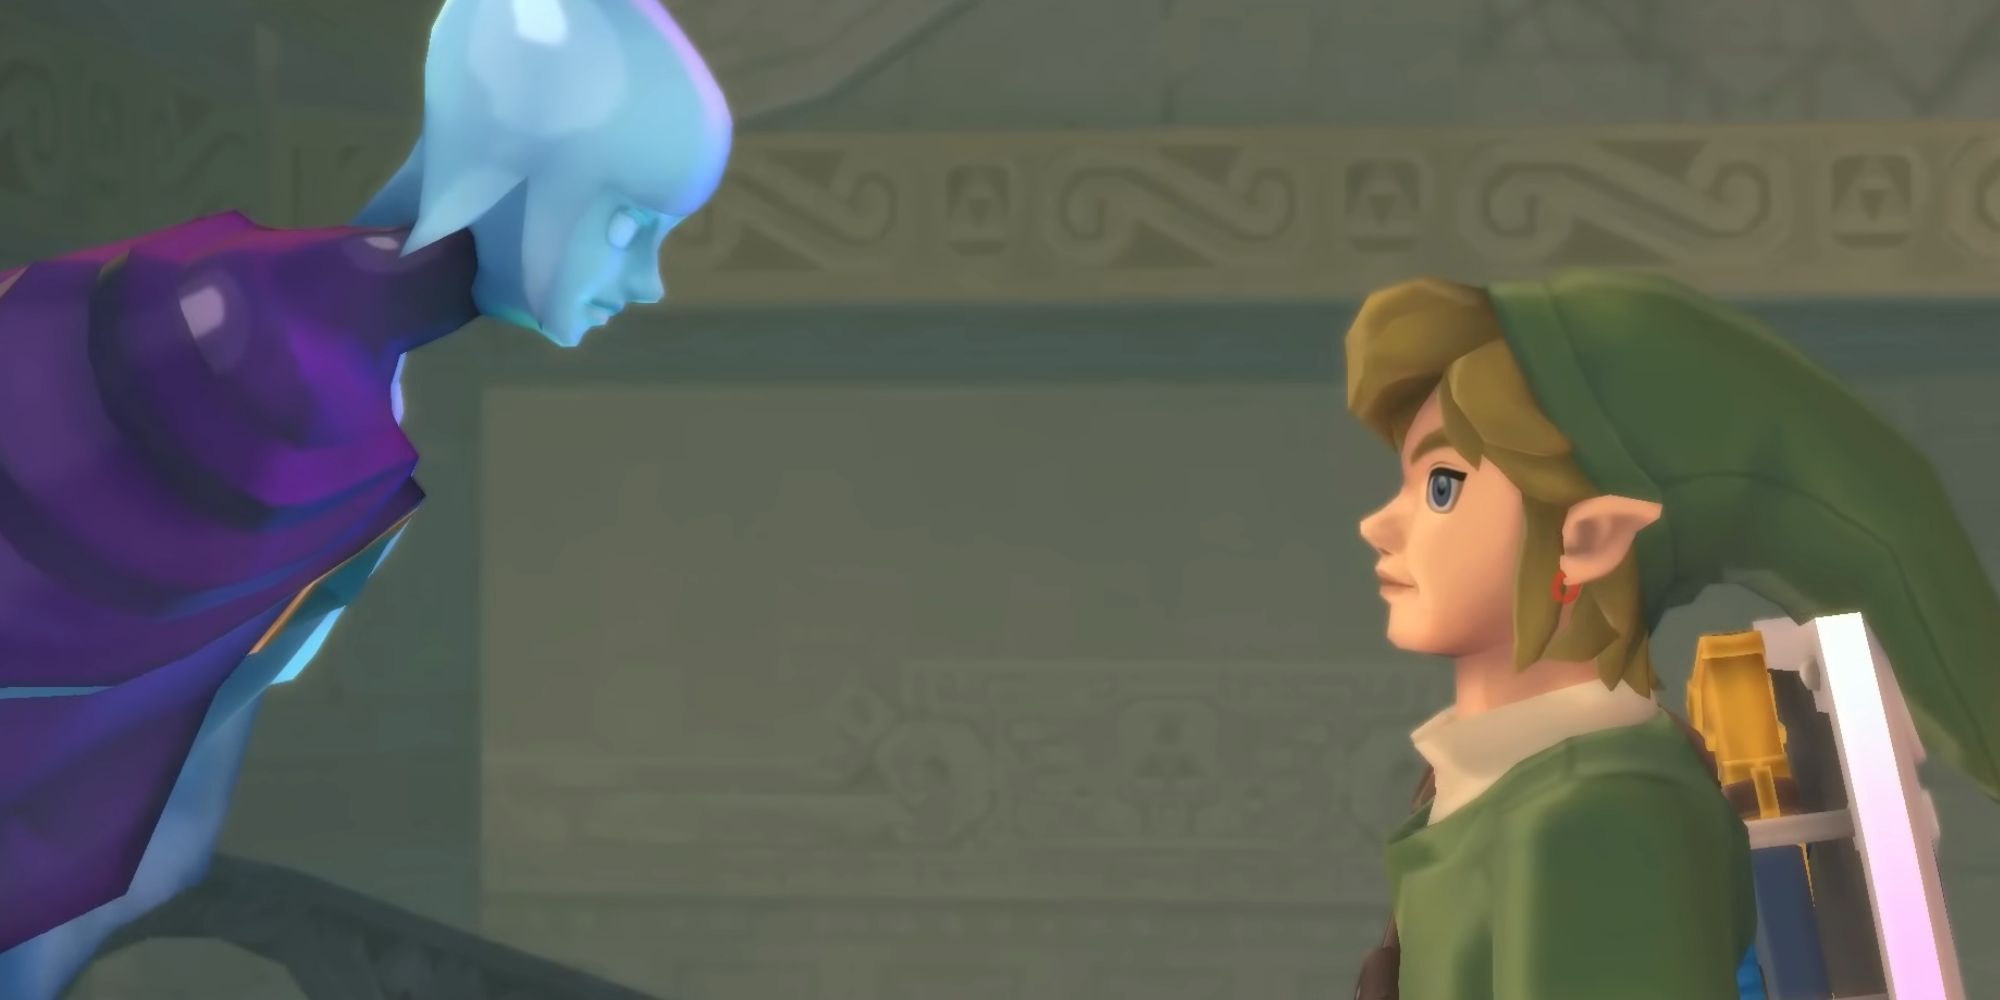 Link says goodbye to Fi as she's sealed away in the Master Sword.